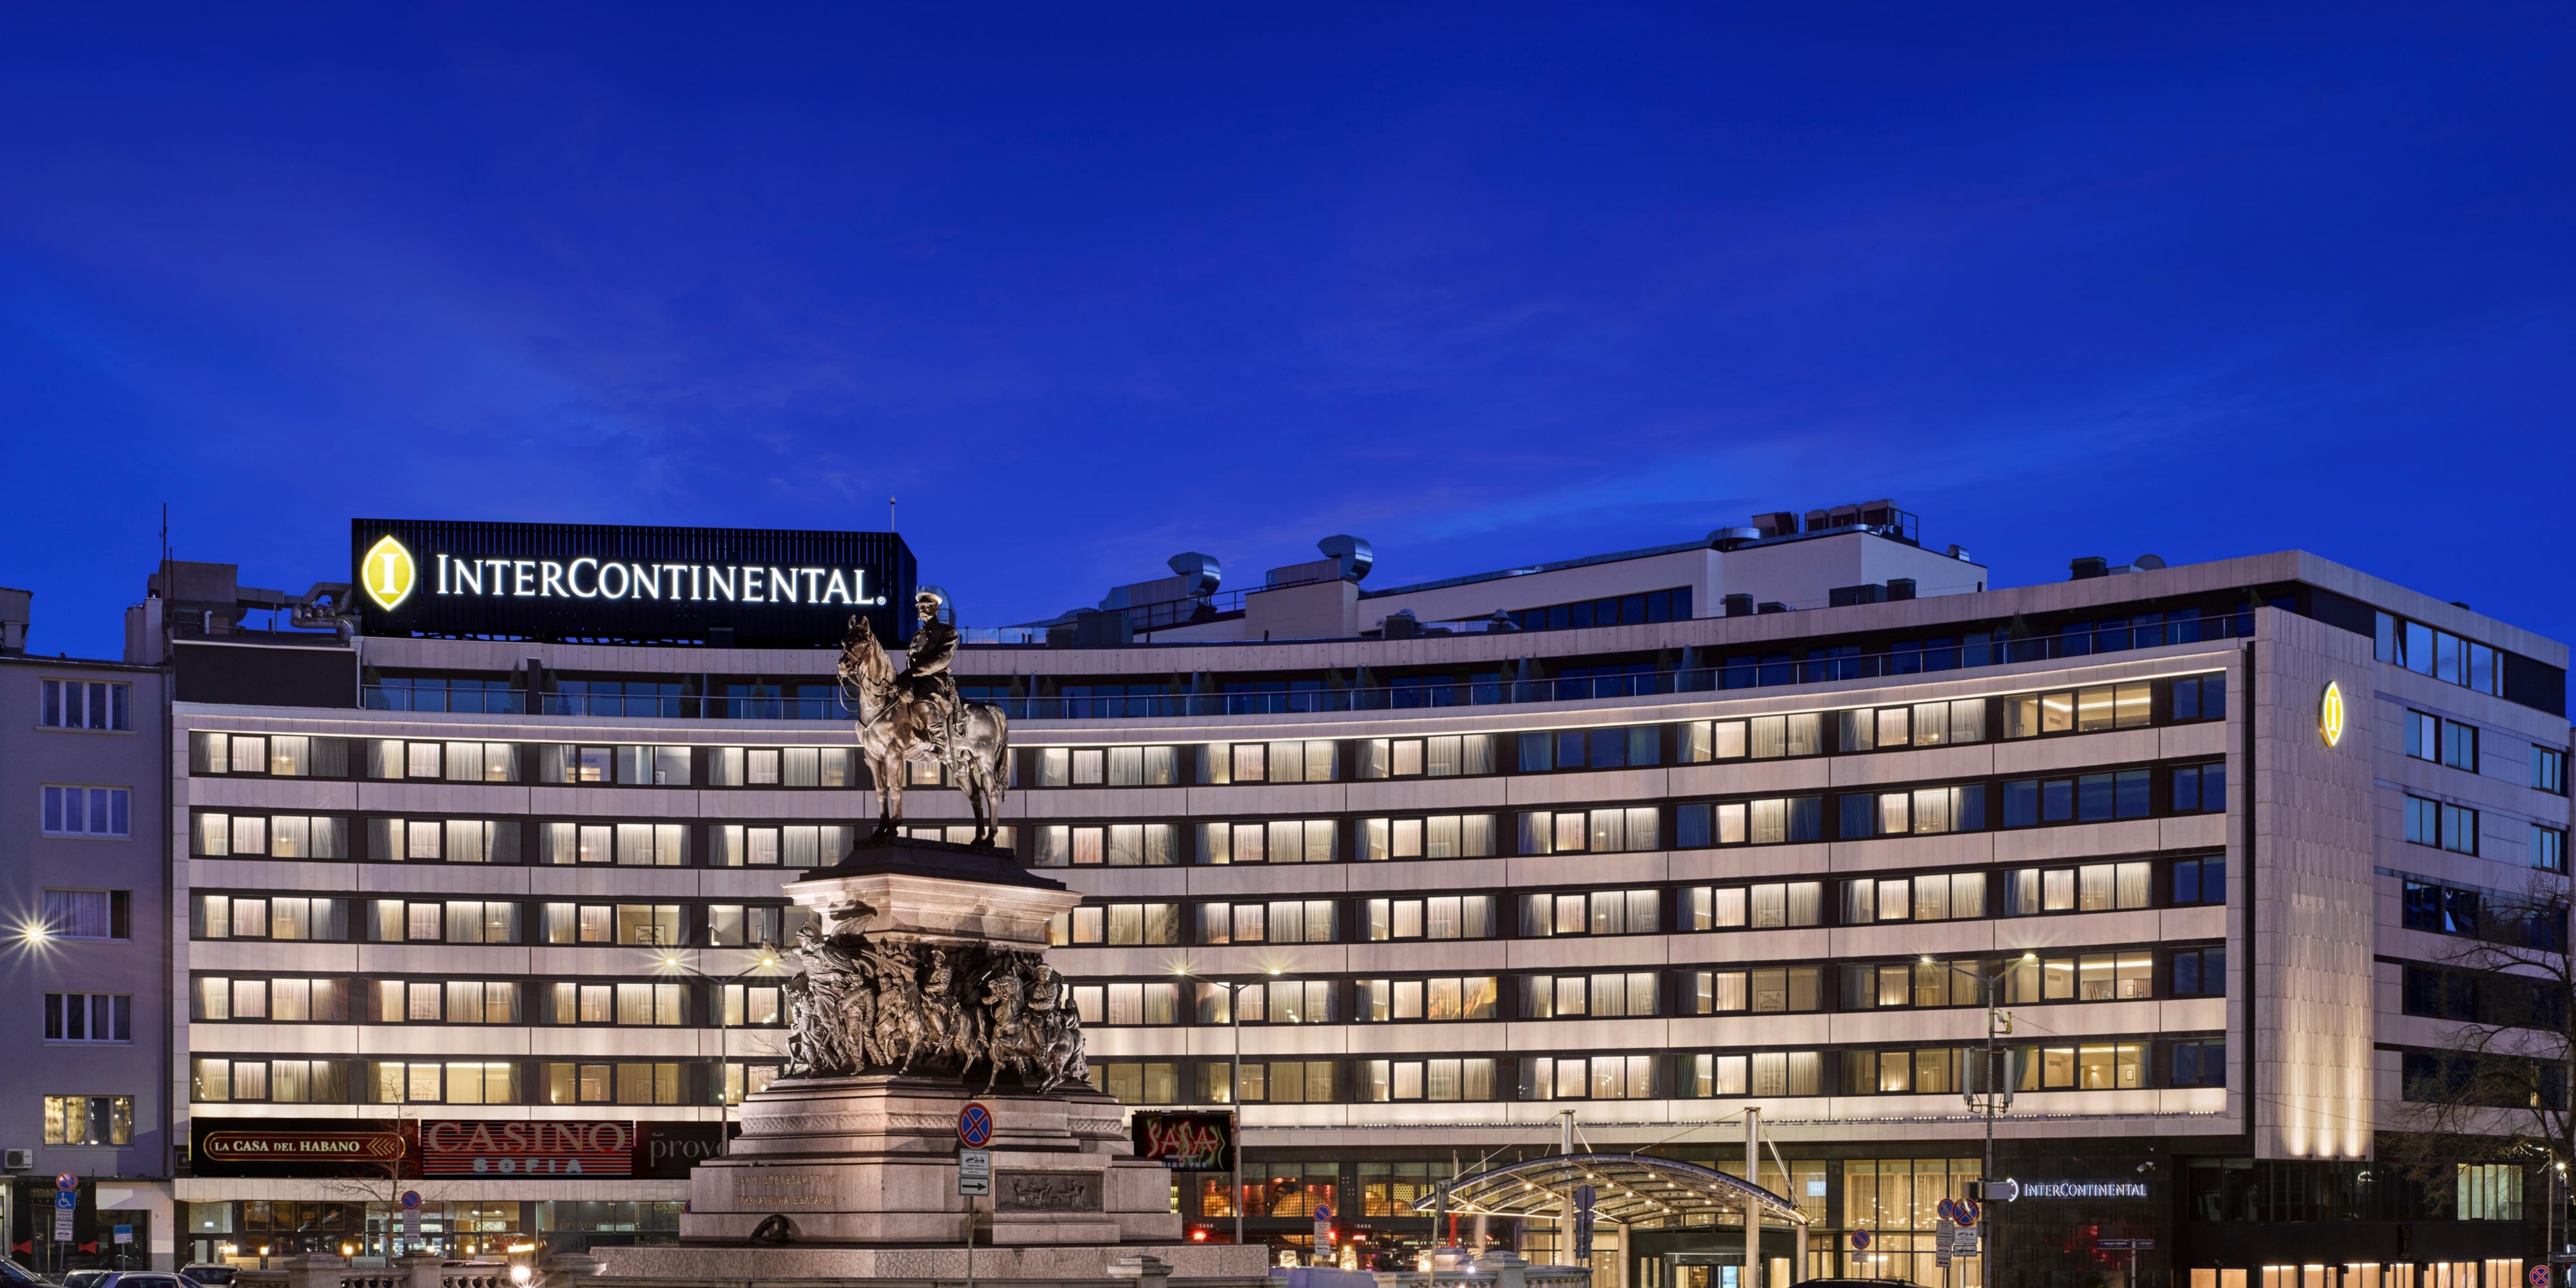 Only three years after its opening, InterContinental Sofia is a proud winner of numerous local and international awards and recognitions, among which Leading New Hotel in Europe for 2019, Leading Hotel in Bulgaria for 2020 and Best Luxury Business Hotel for Eastern Europe for 2020. 